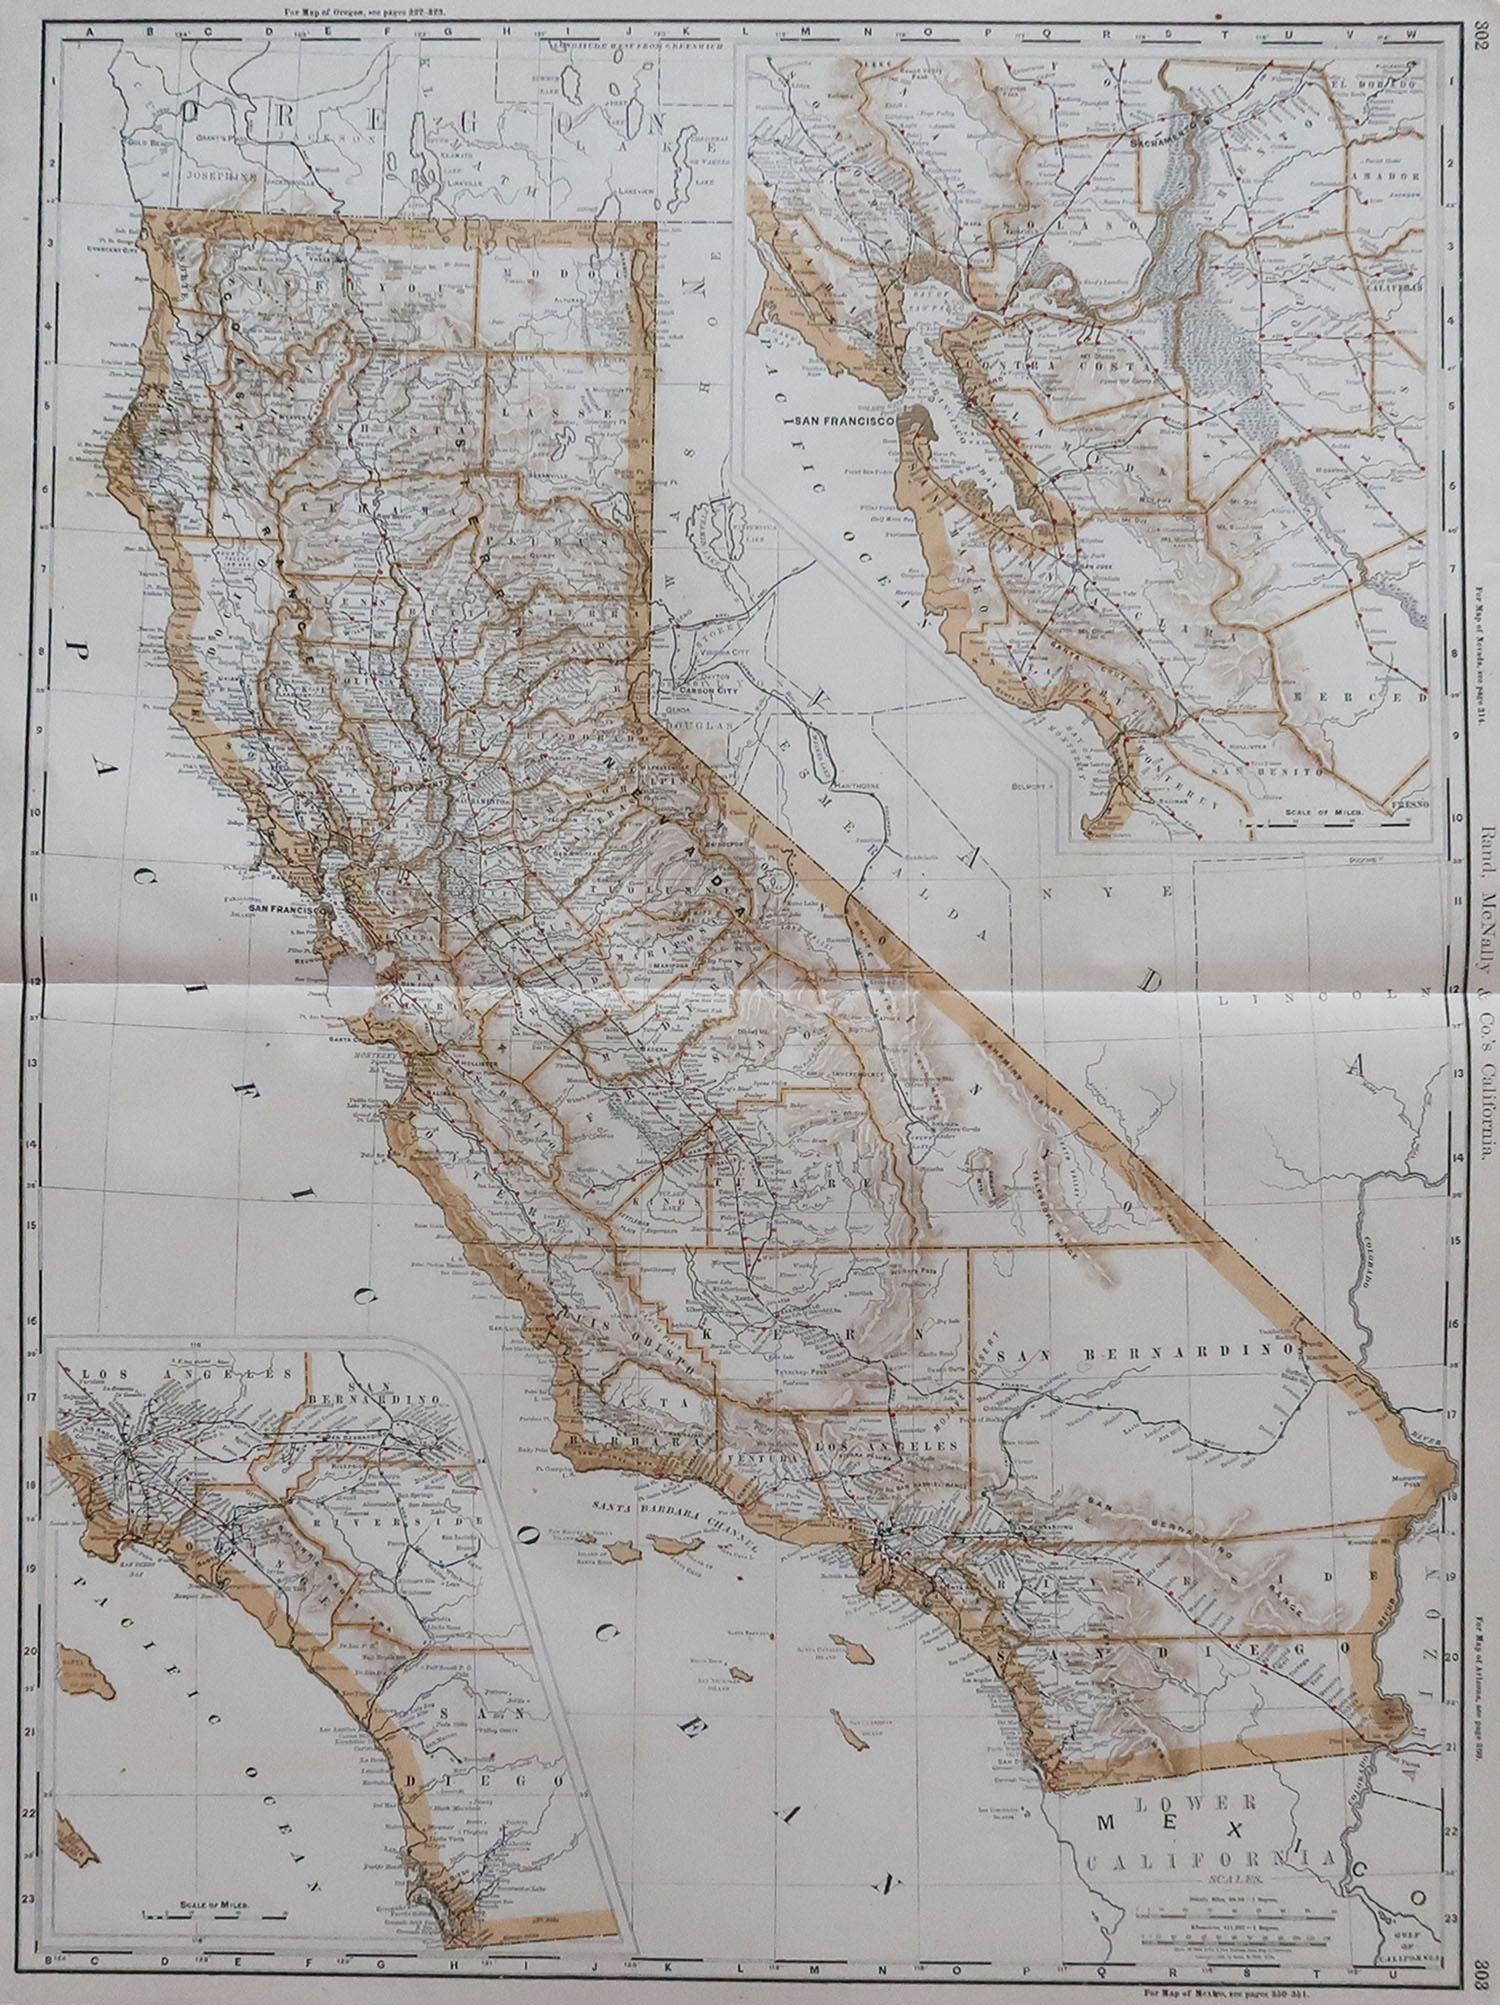 Fabulous map of California

Original color

By Rand, McNally & Co.

Published, 1894

Slight surface loss just south of San Francisco. Shown in the images.

Unframed

Free shipping.